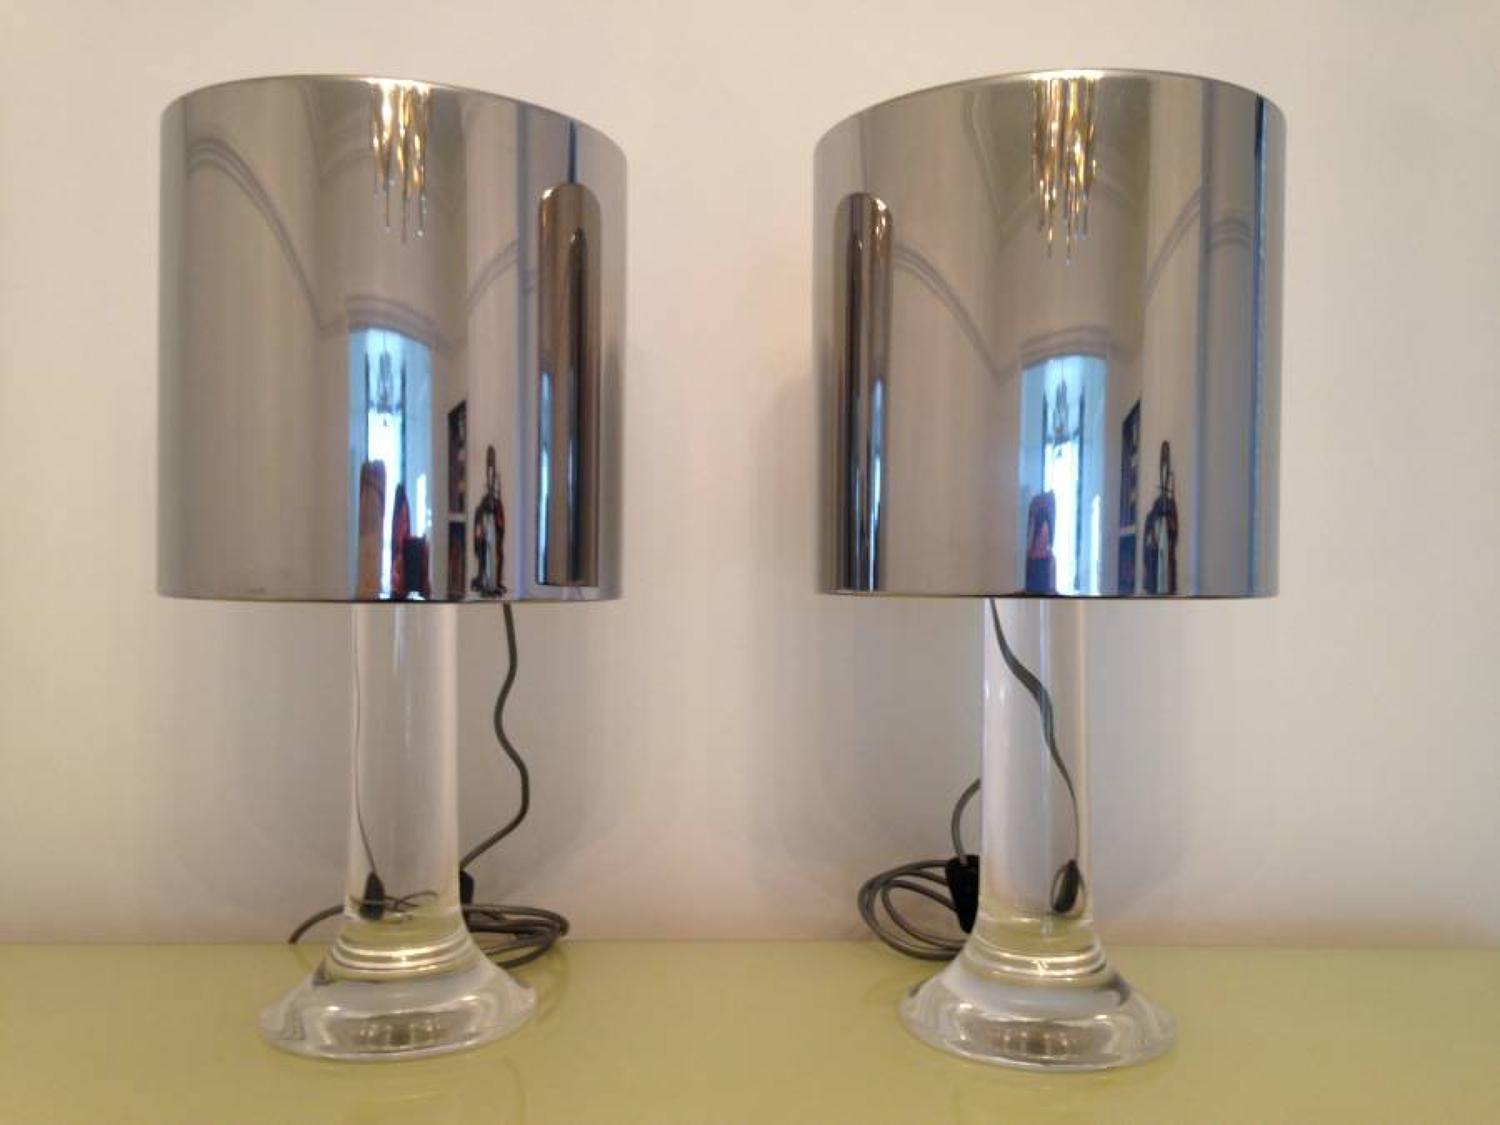 A pair of lucite table lamps by Guzzini